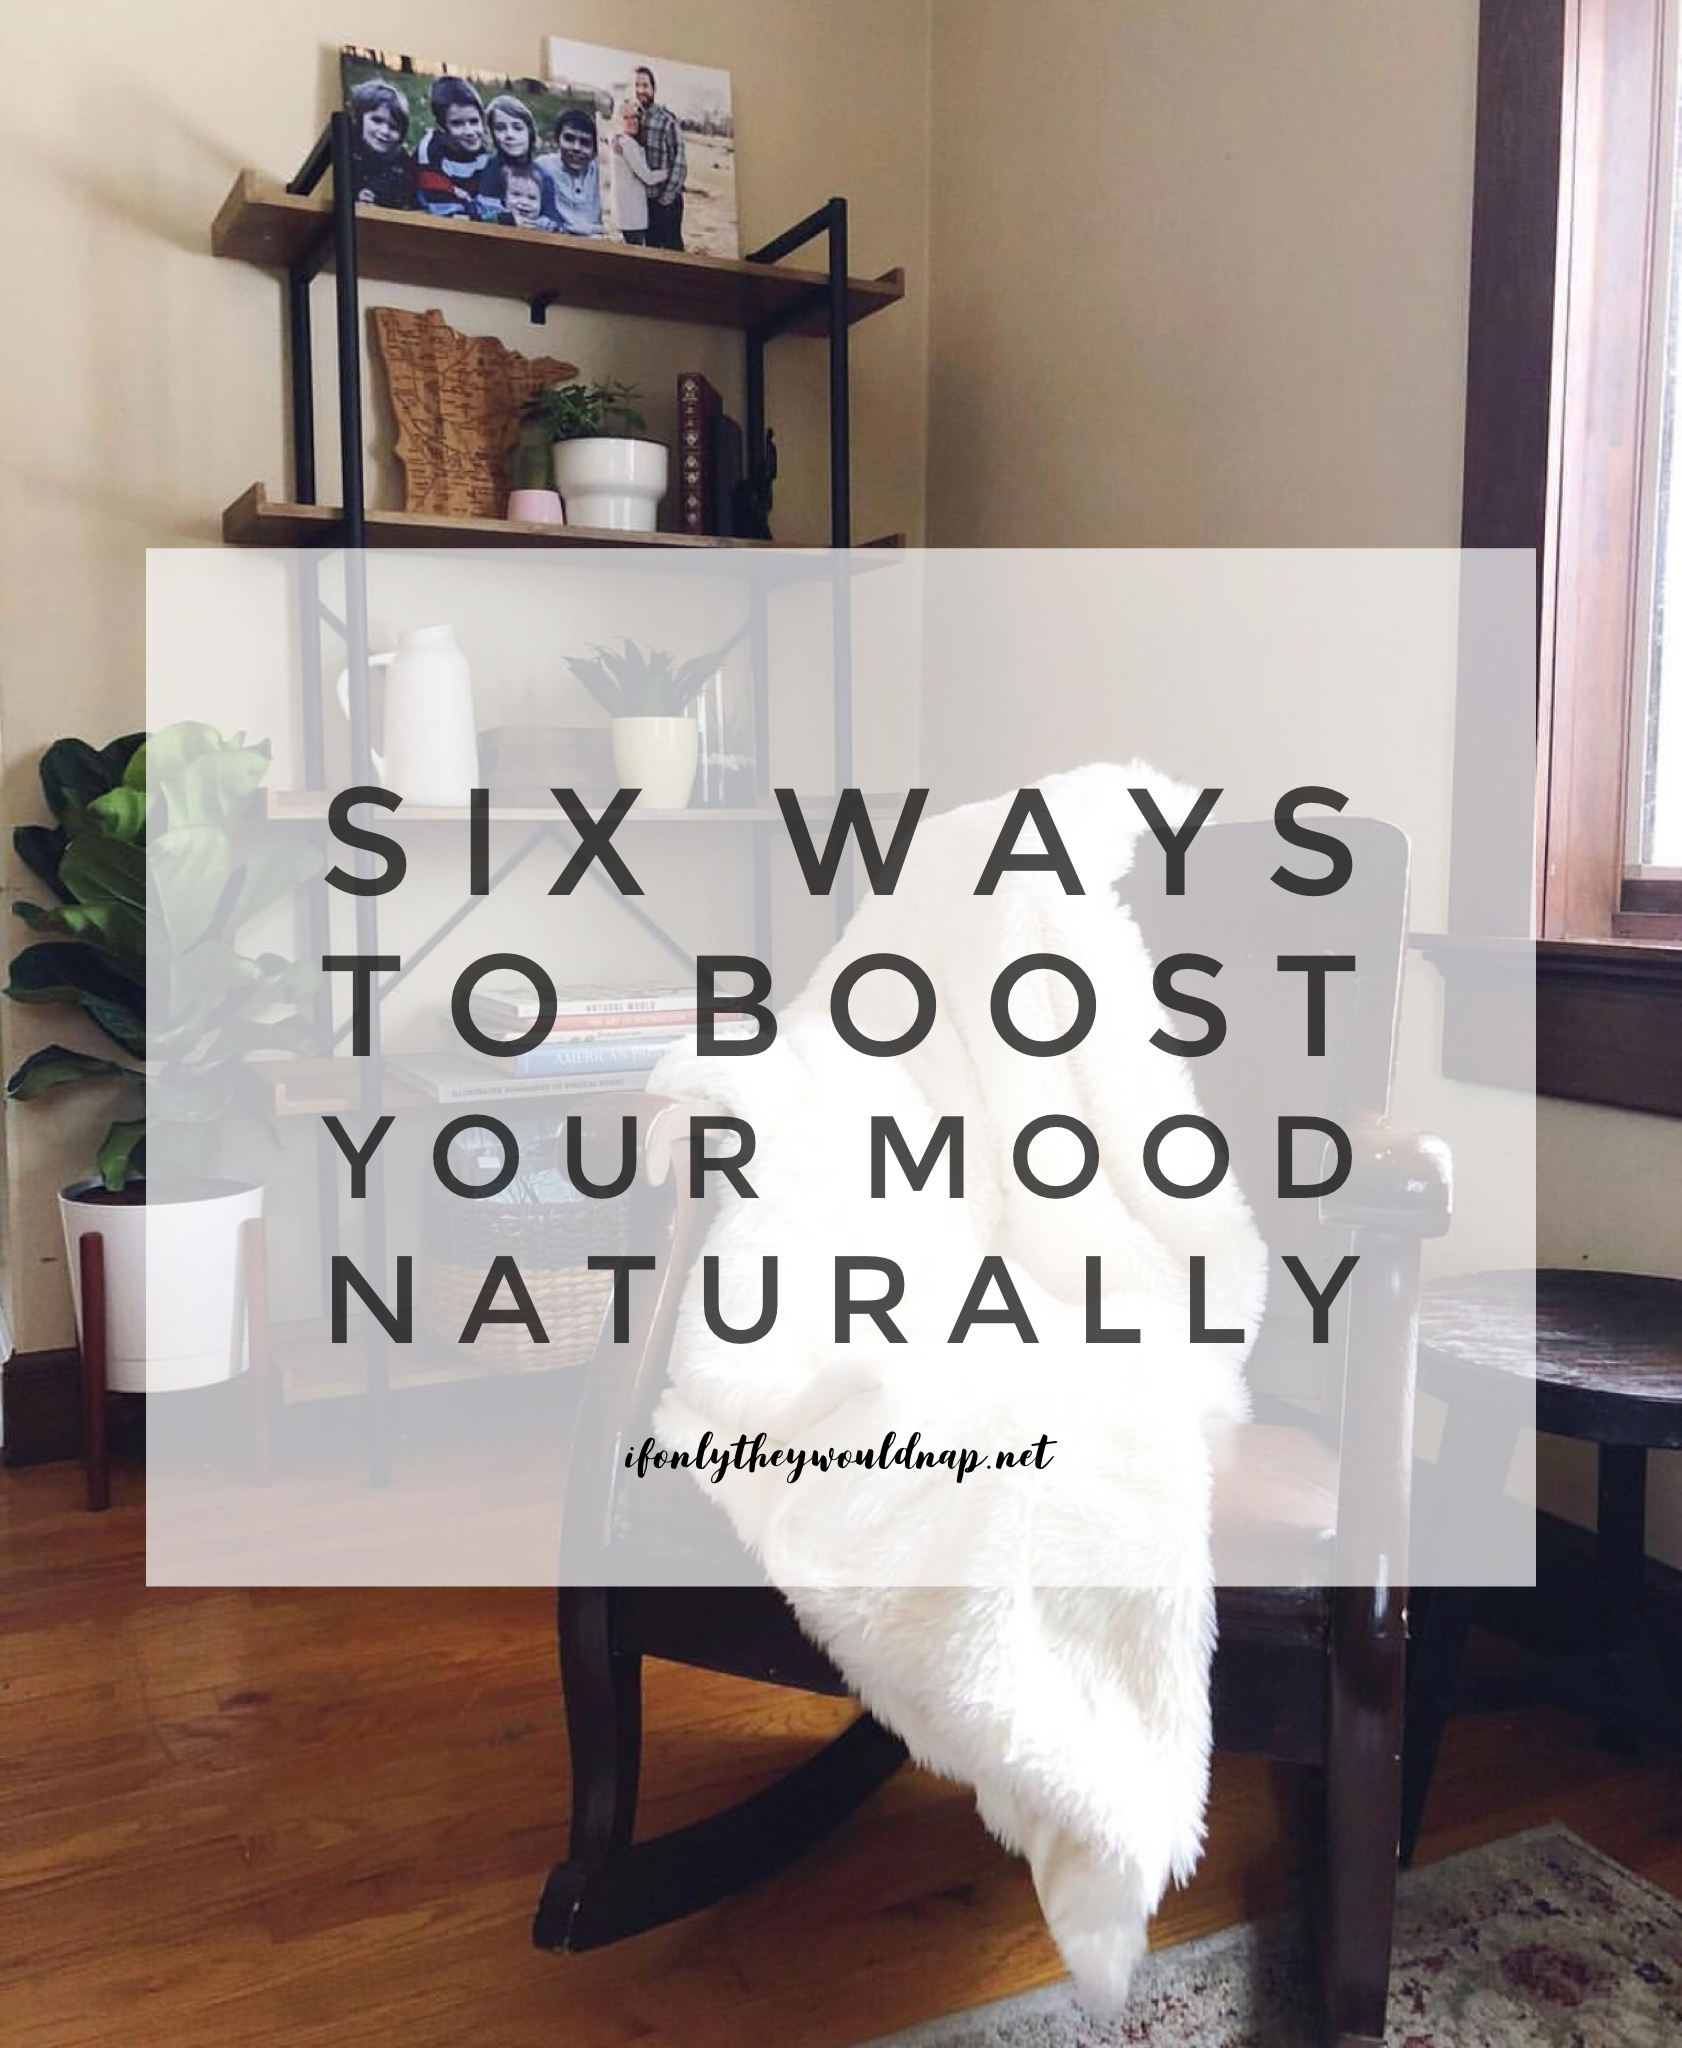 6 Ways to Boost your Mood Naturally